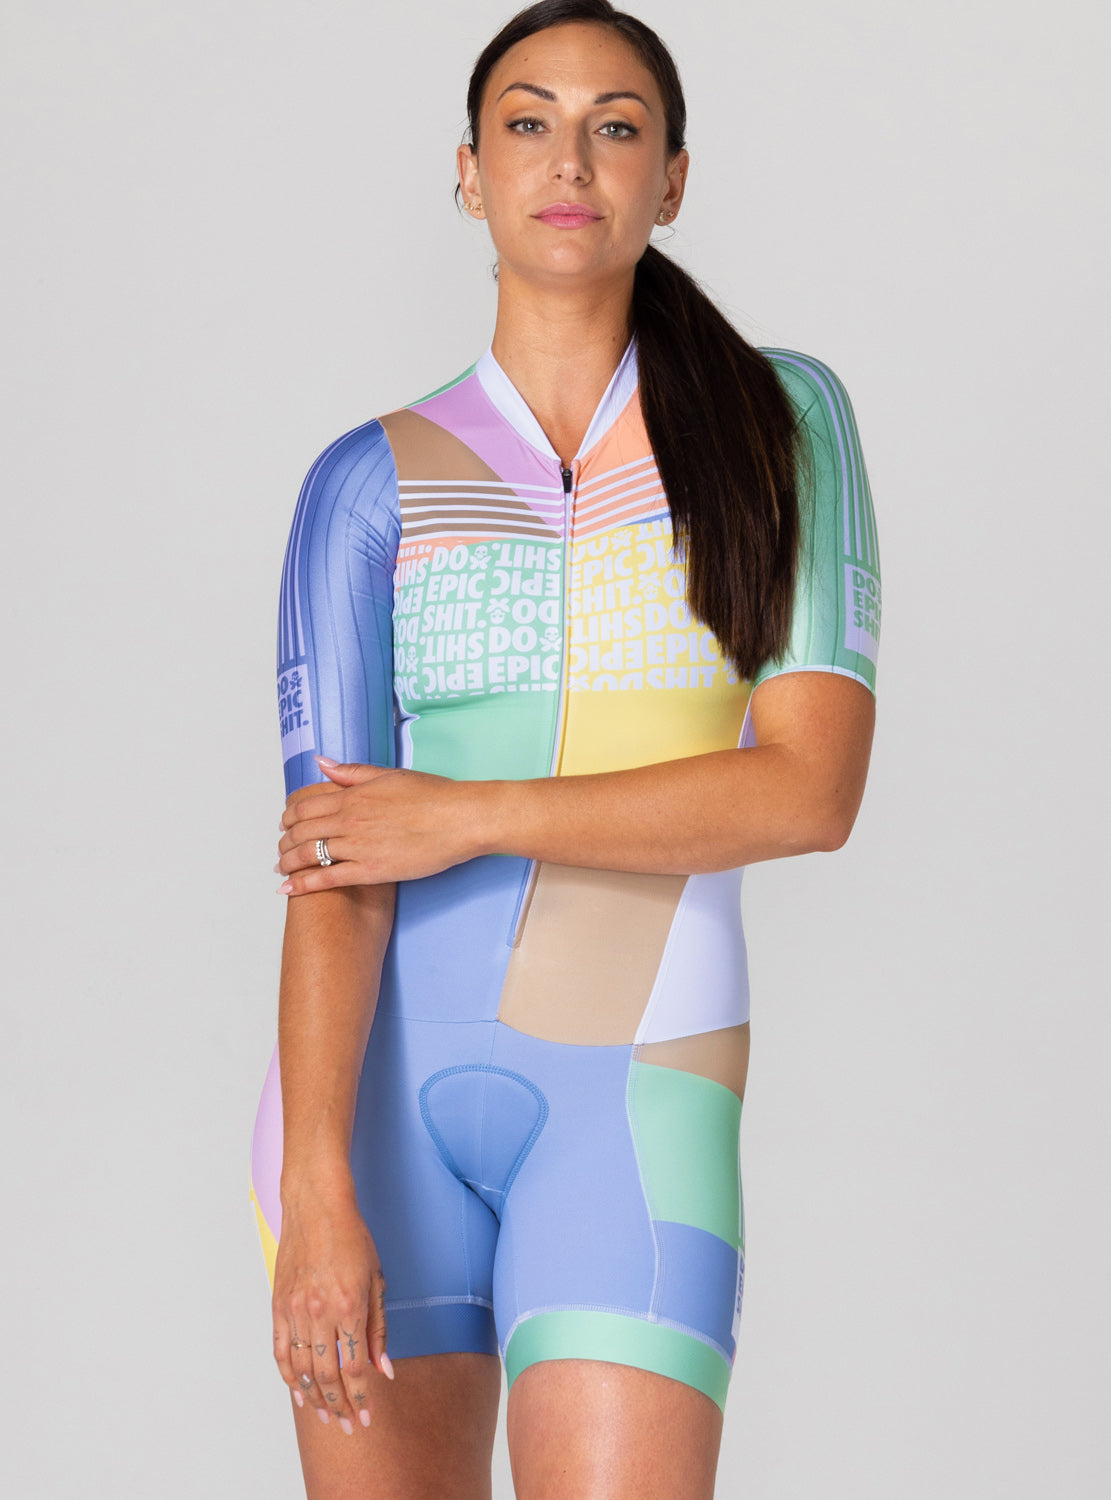 betty designs do epic shit womens short sleeved tri suit skinsuit